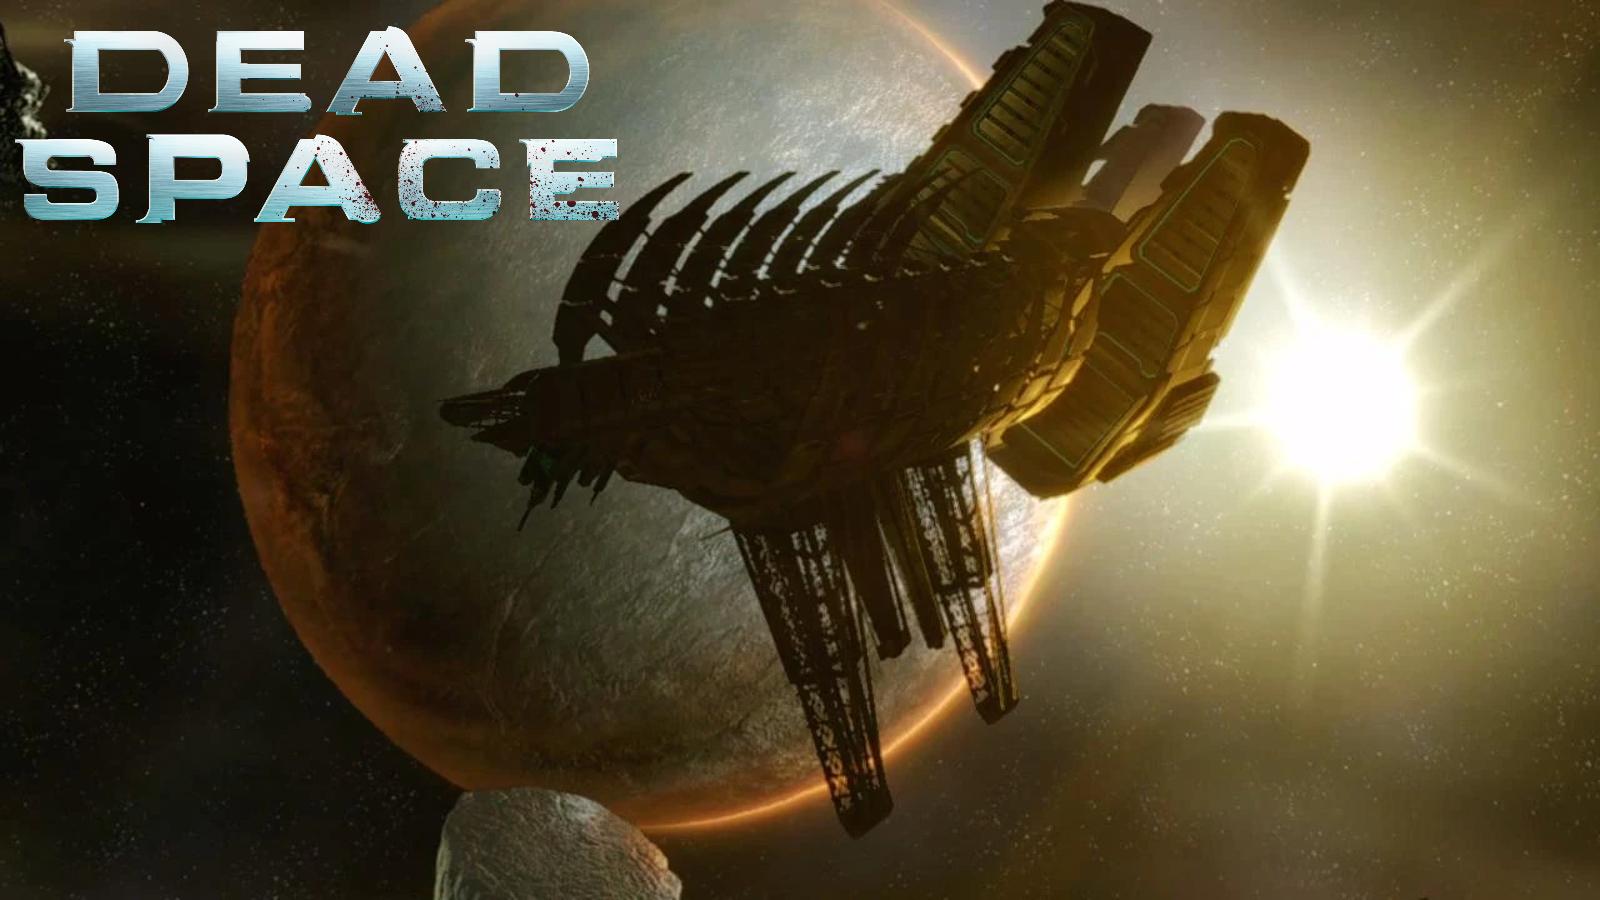 Dead Space' returns to haunt your dreams with new remake